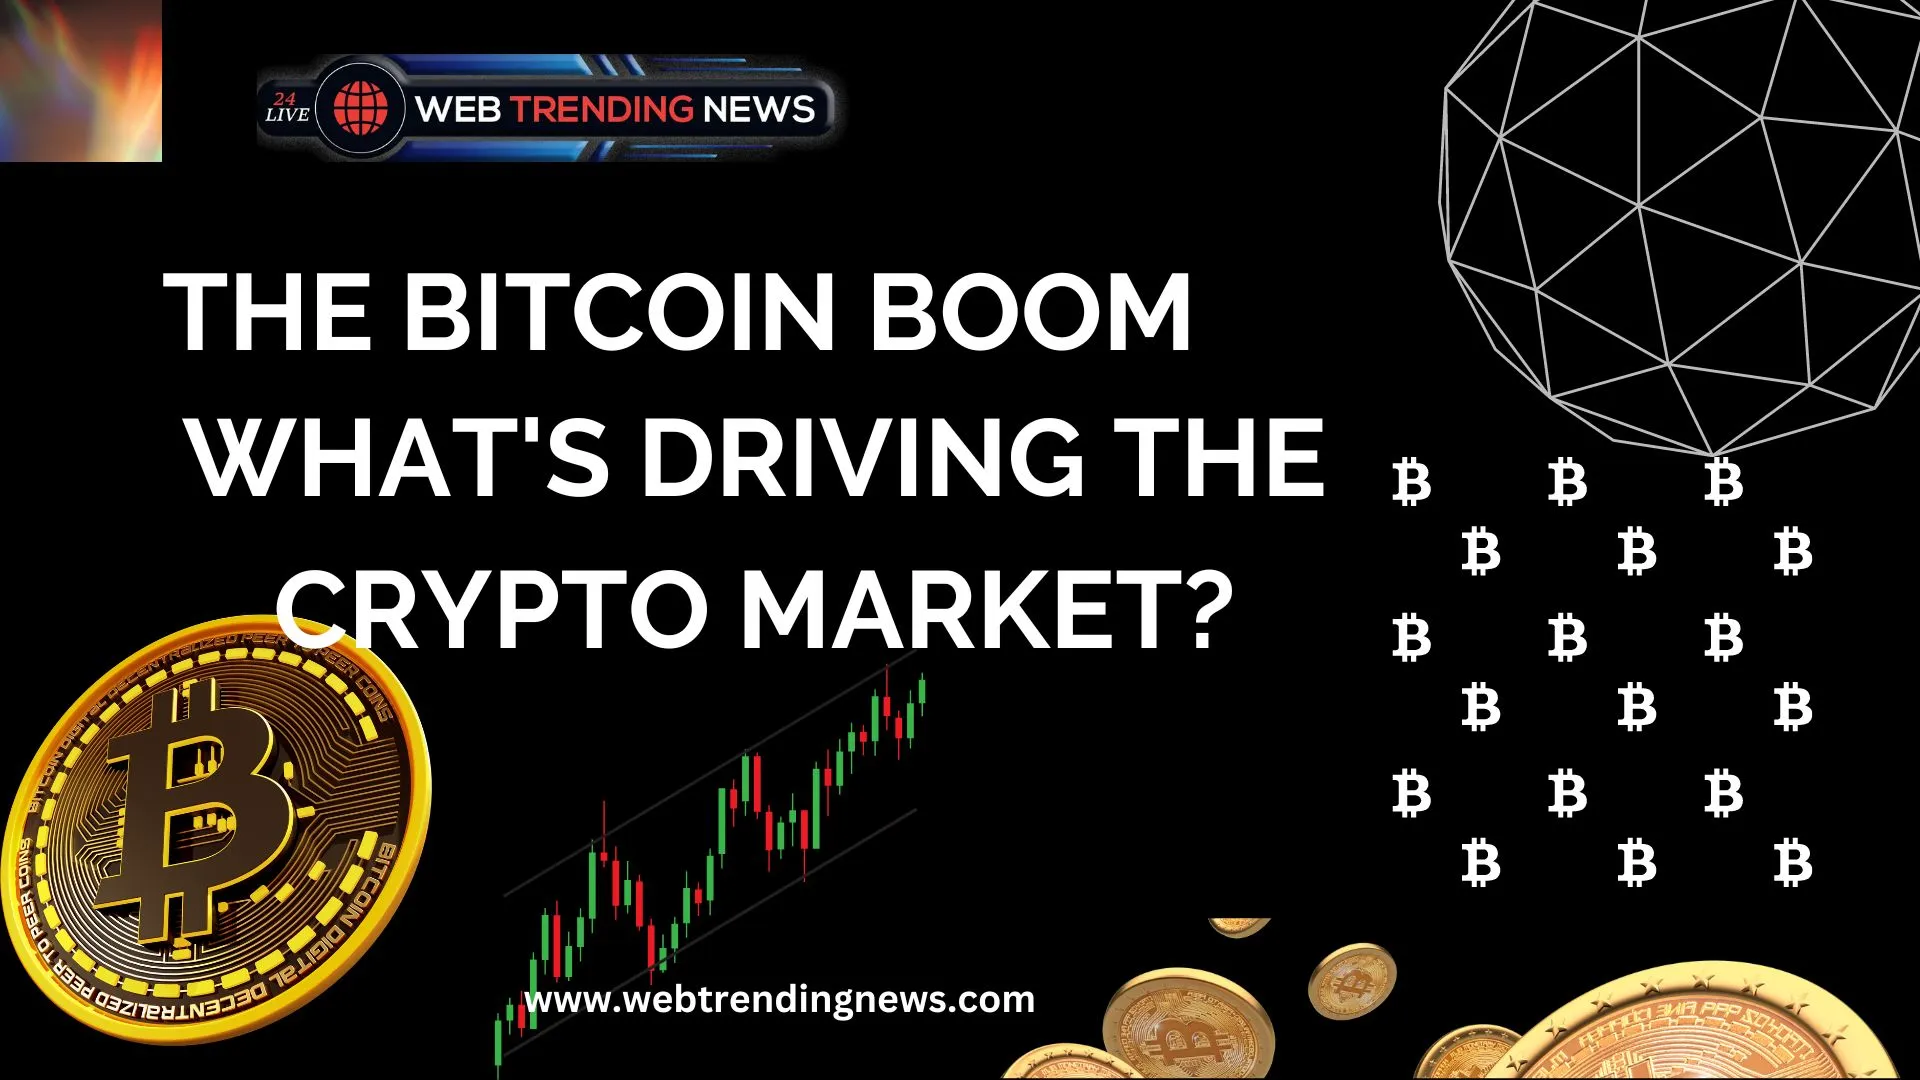 The Bitcoin Boom: What's Driving the Crypto Market?